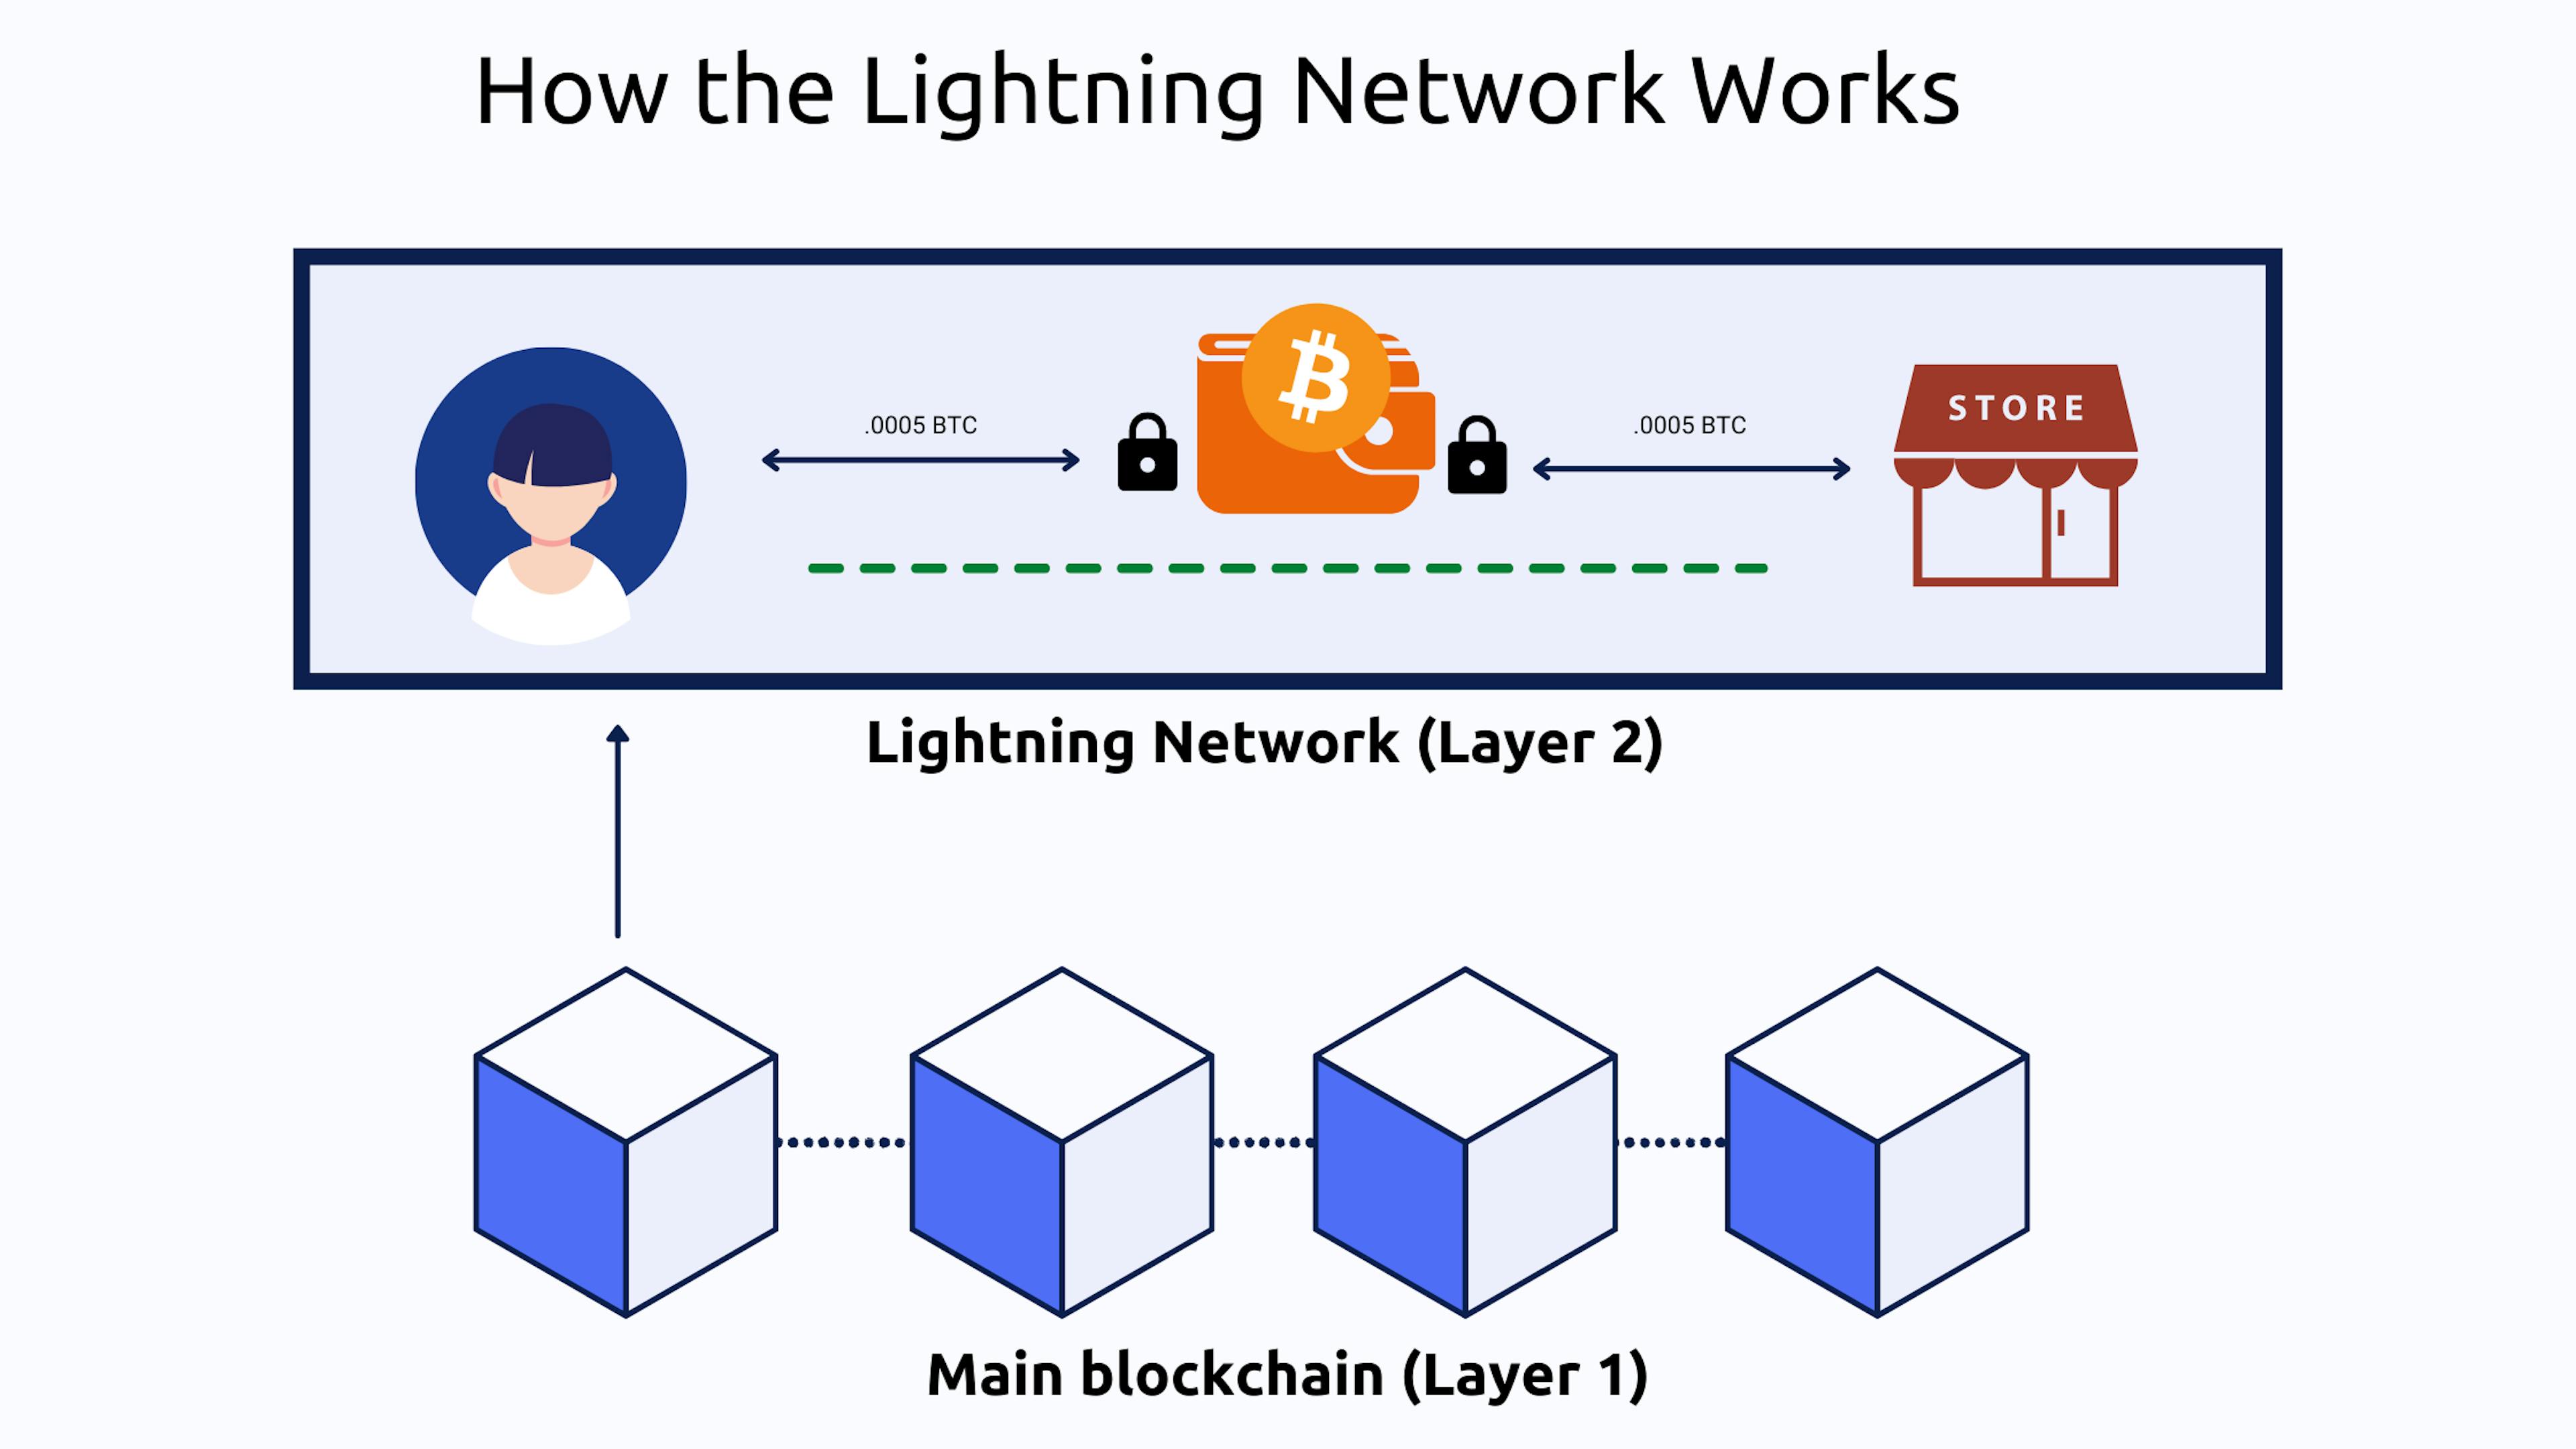 Image source: https://bitpay.com/blog/what-is-the-lightning-network/